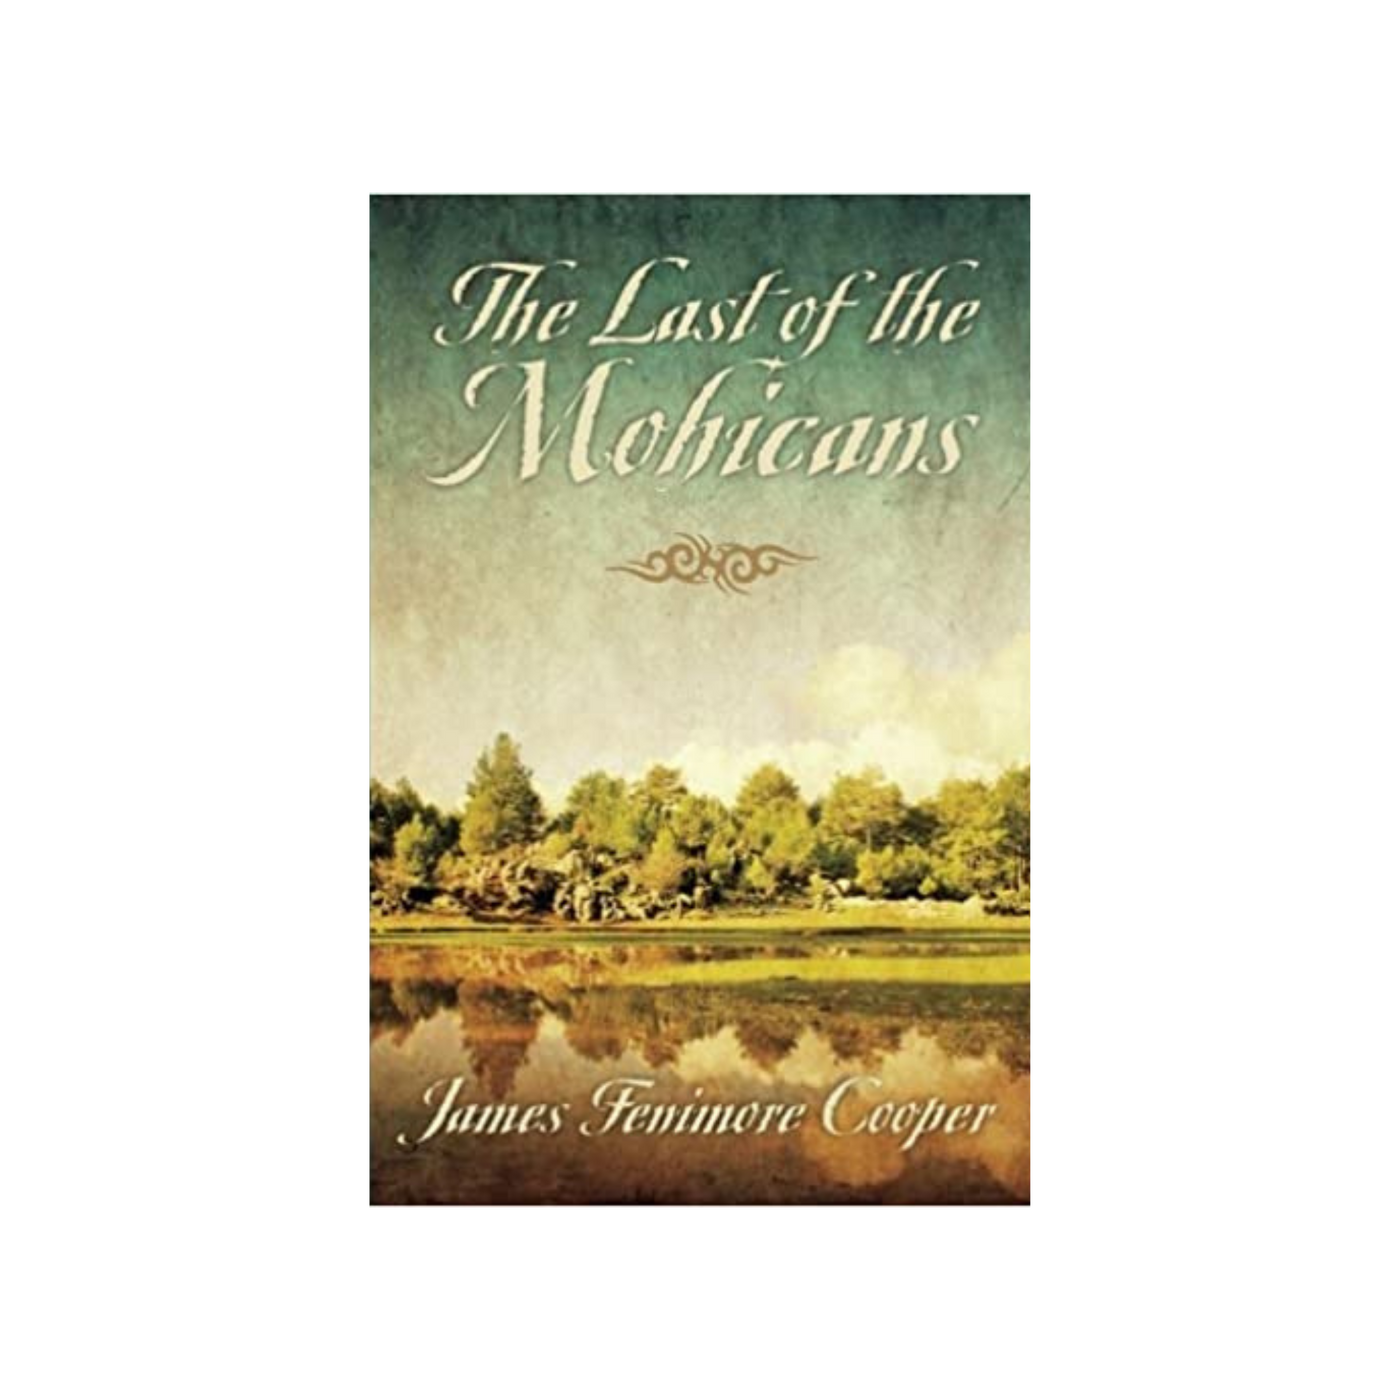 The Last Of The Mohicans by James Fenimore Cooper